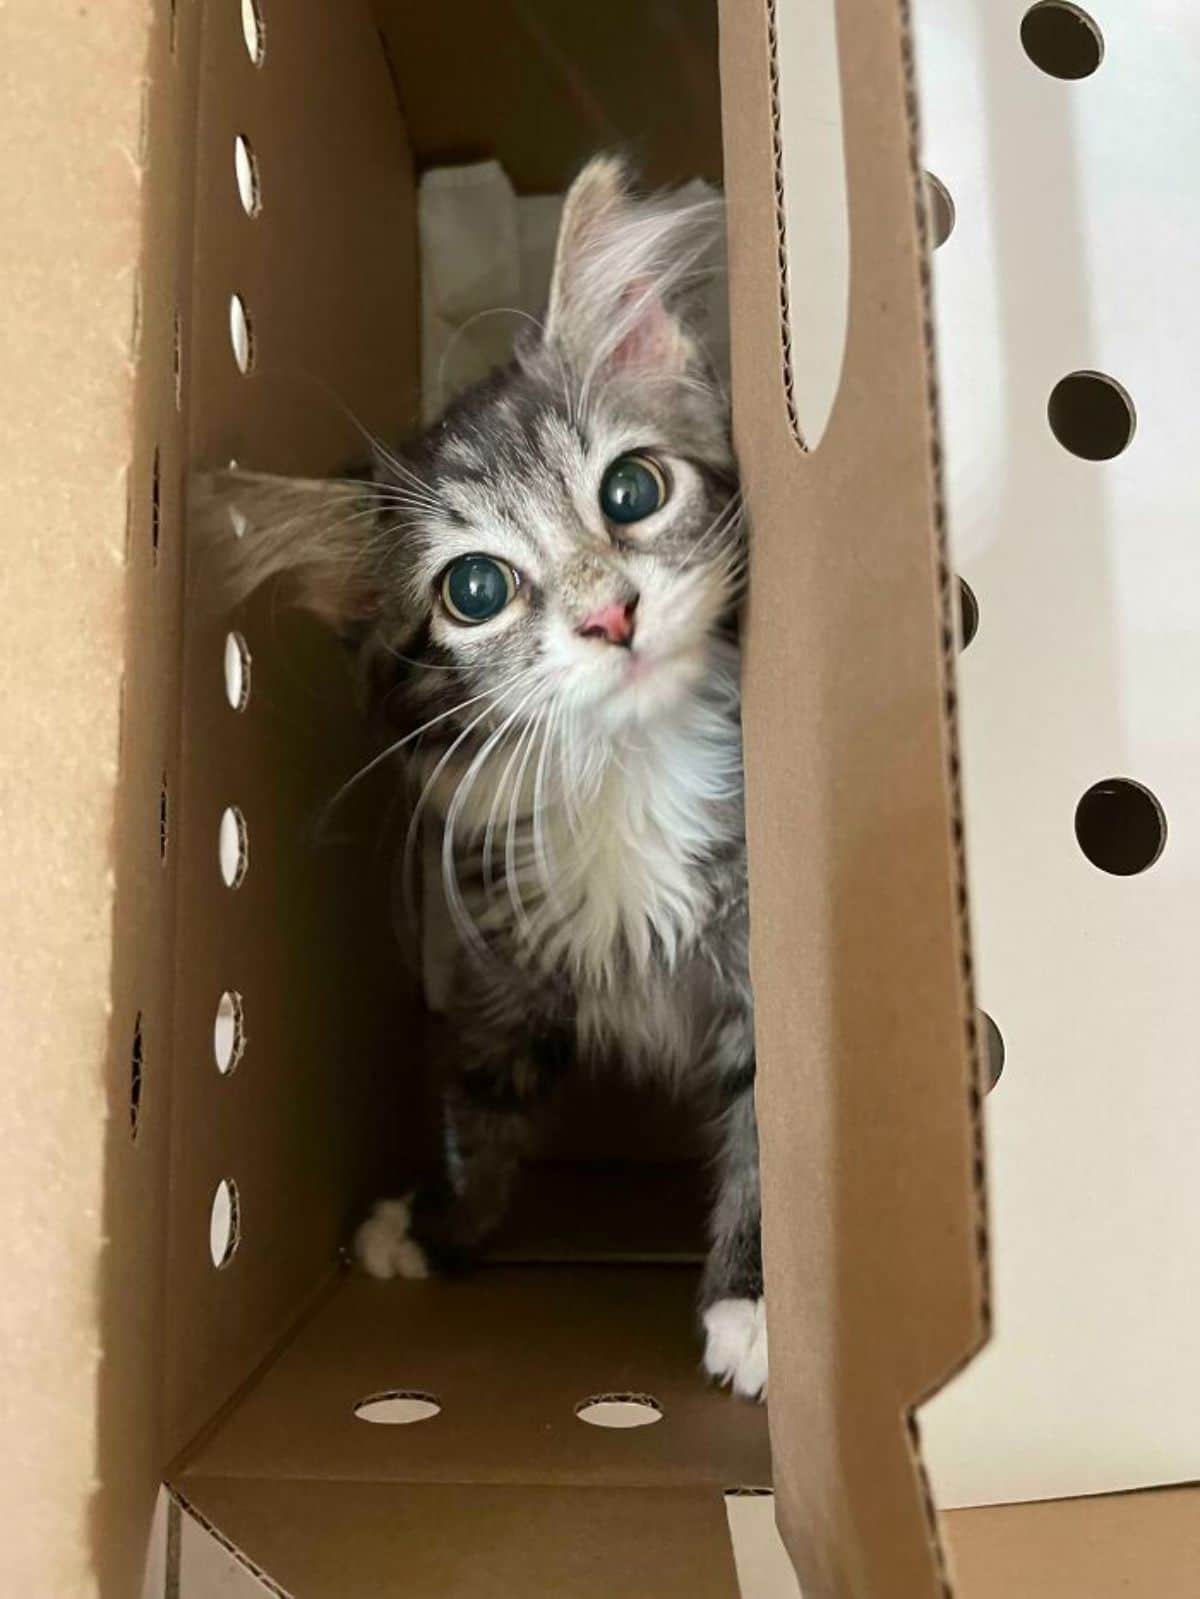 fluffy grey and white cat inside a cardboard box